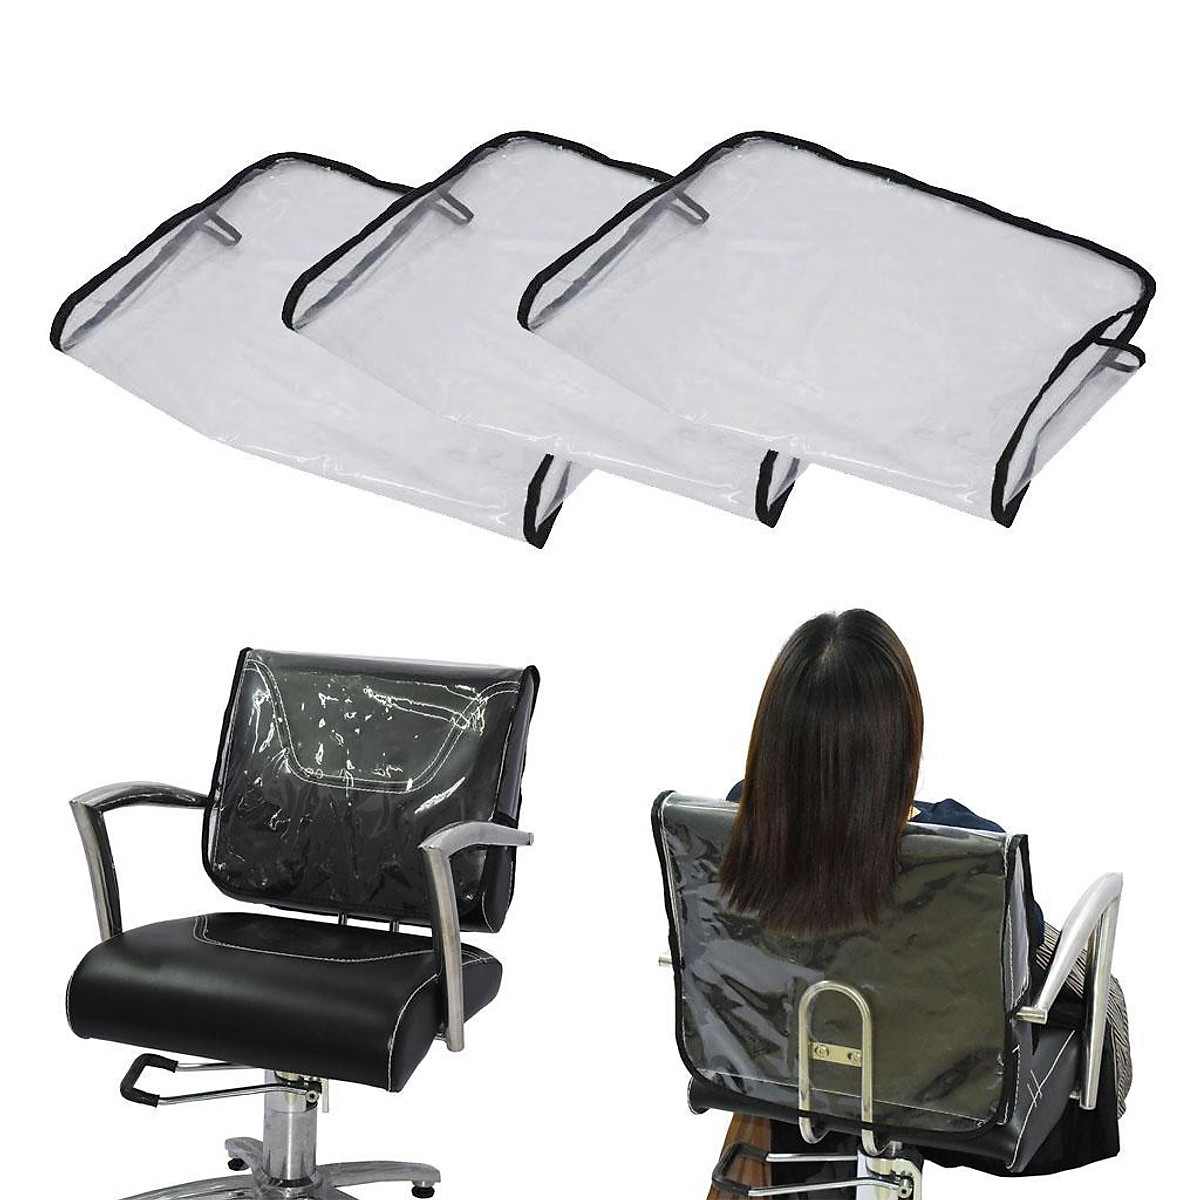 Mua 3x Hairdressing Barber Chair Back Cover Salon Spa Professional Plastic  Covers tại Magideal2